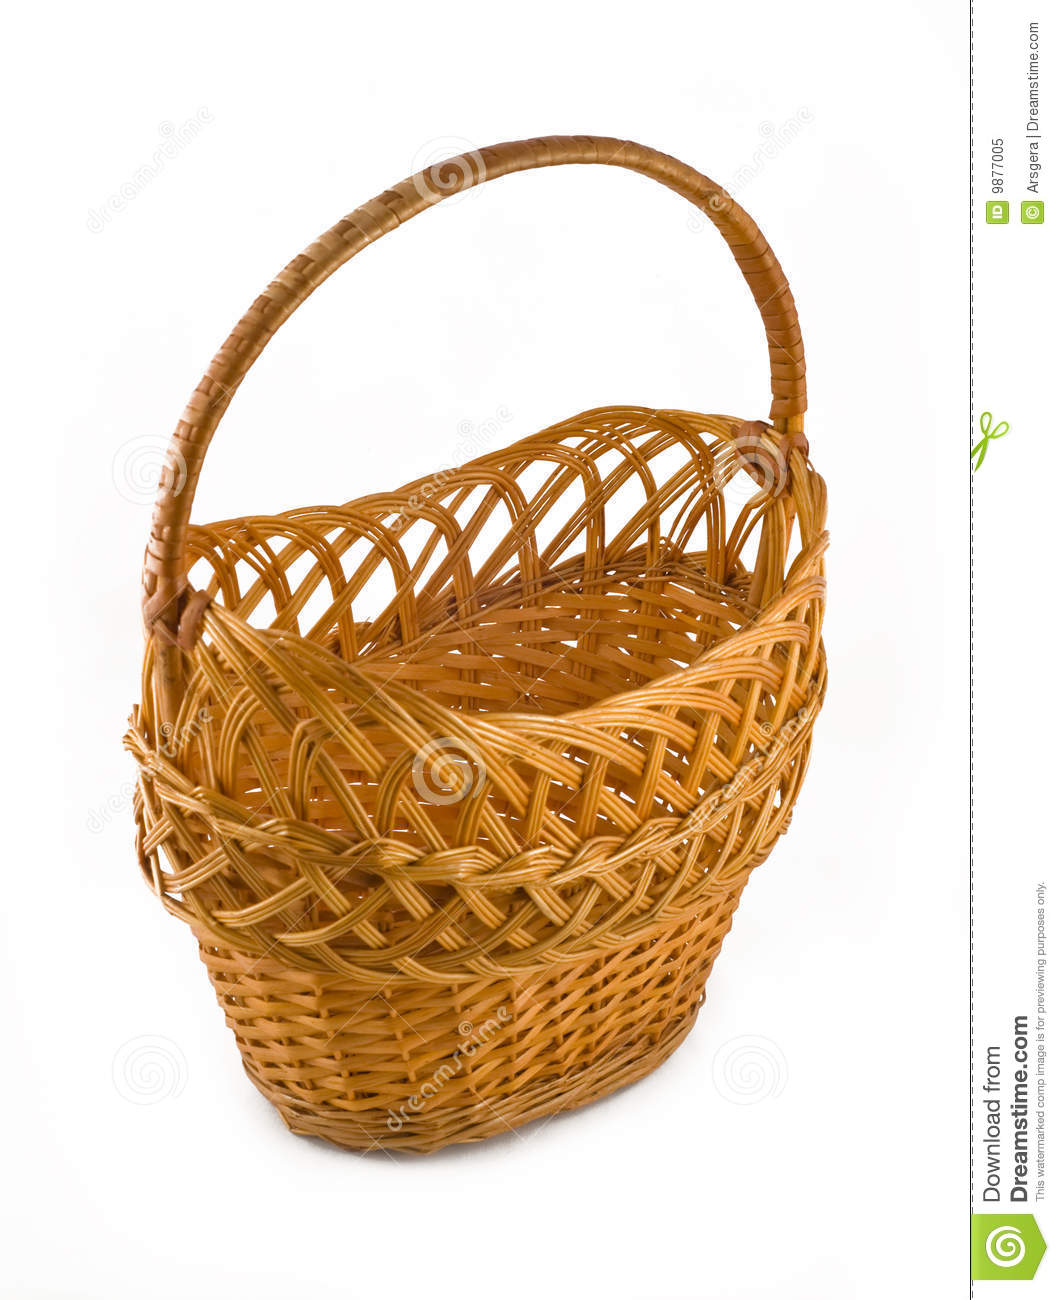 Wicker Woven Basket Over White Royalty Free Stock Photo   Image